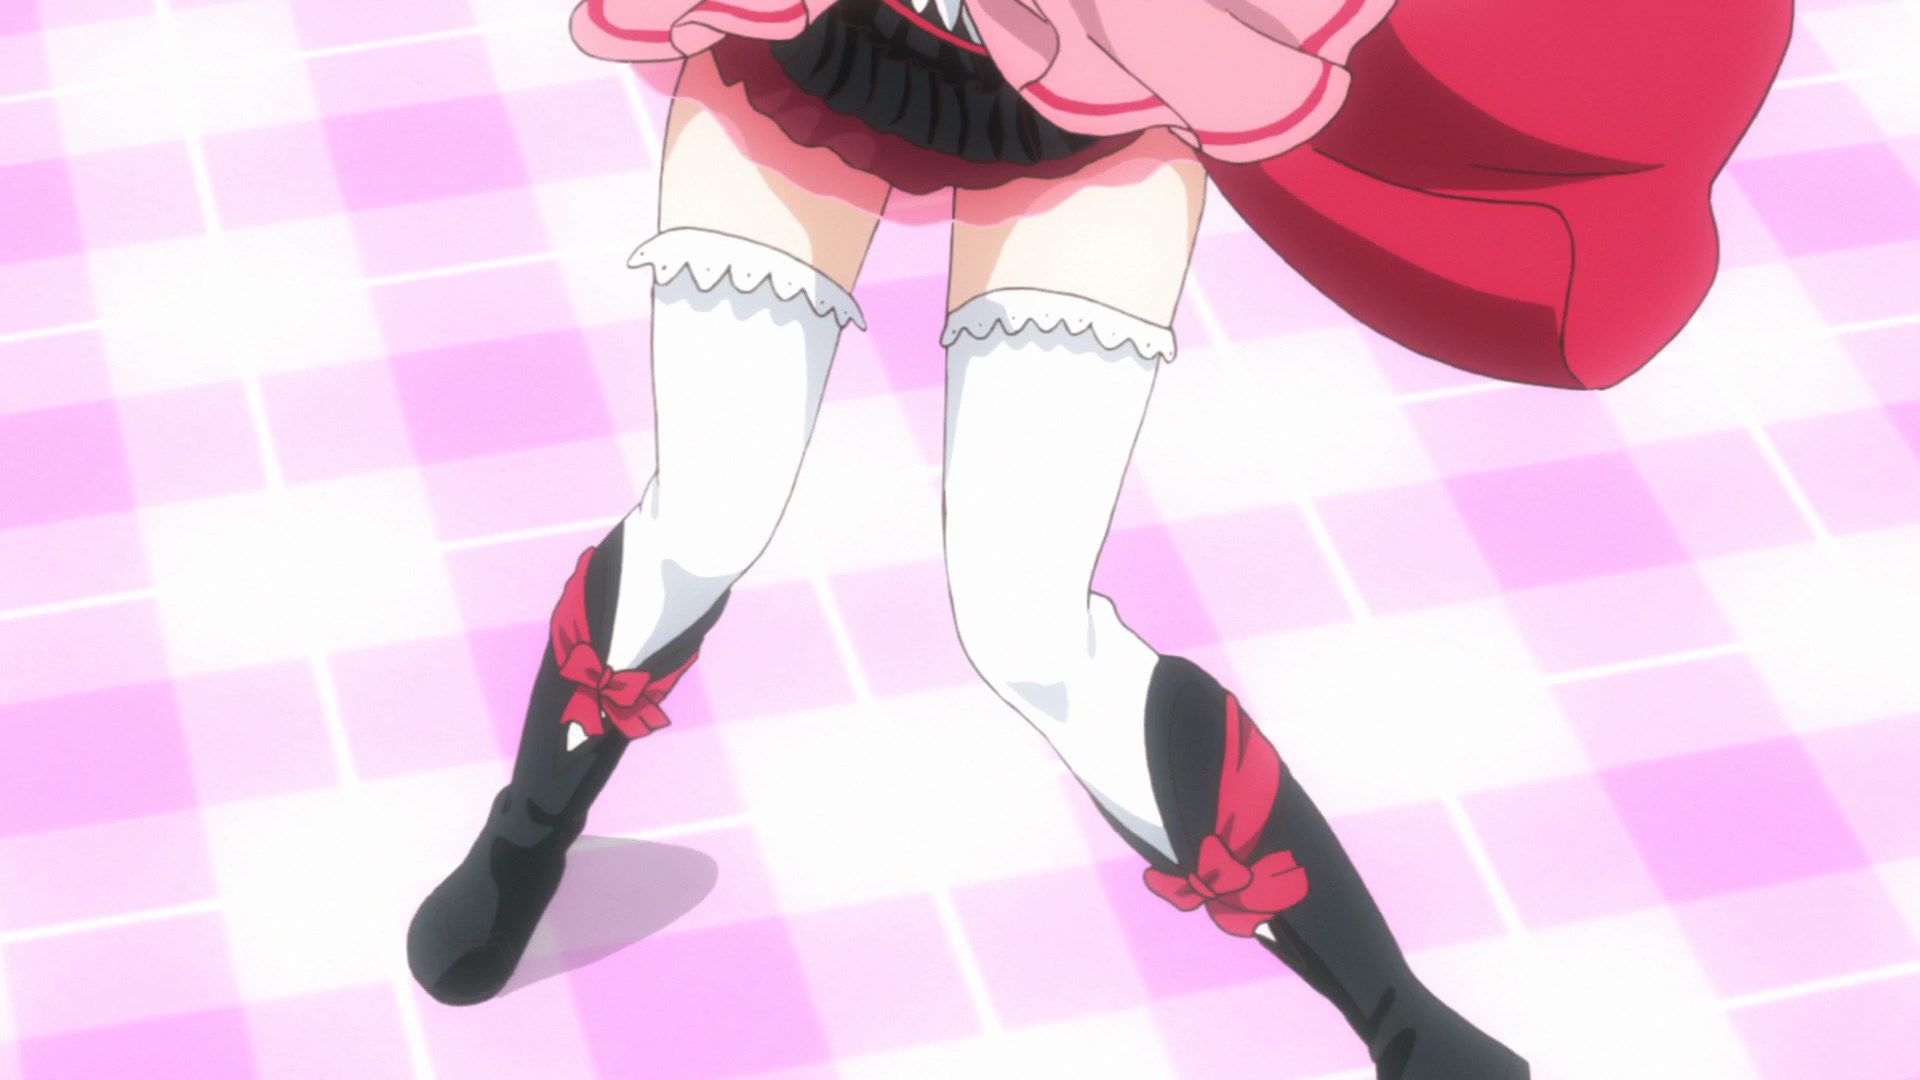 [God images] "love live! ' Μm ' PV's leg is too erotic everyone wakes up to a leg fetish of wwwww 73